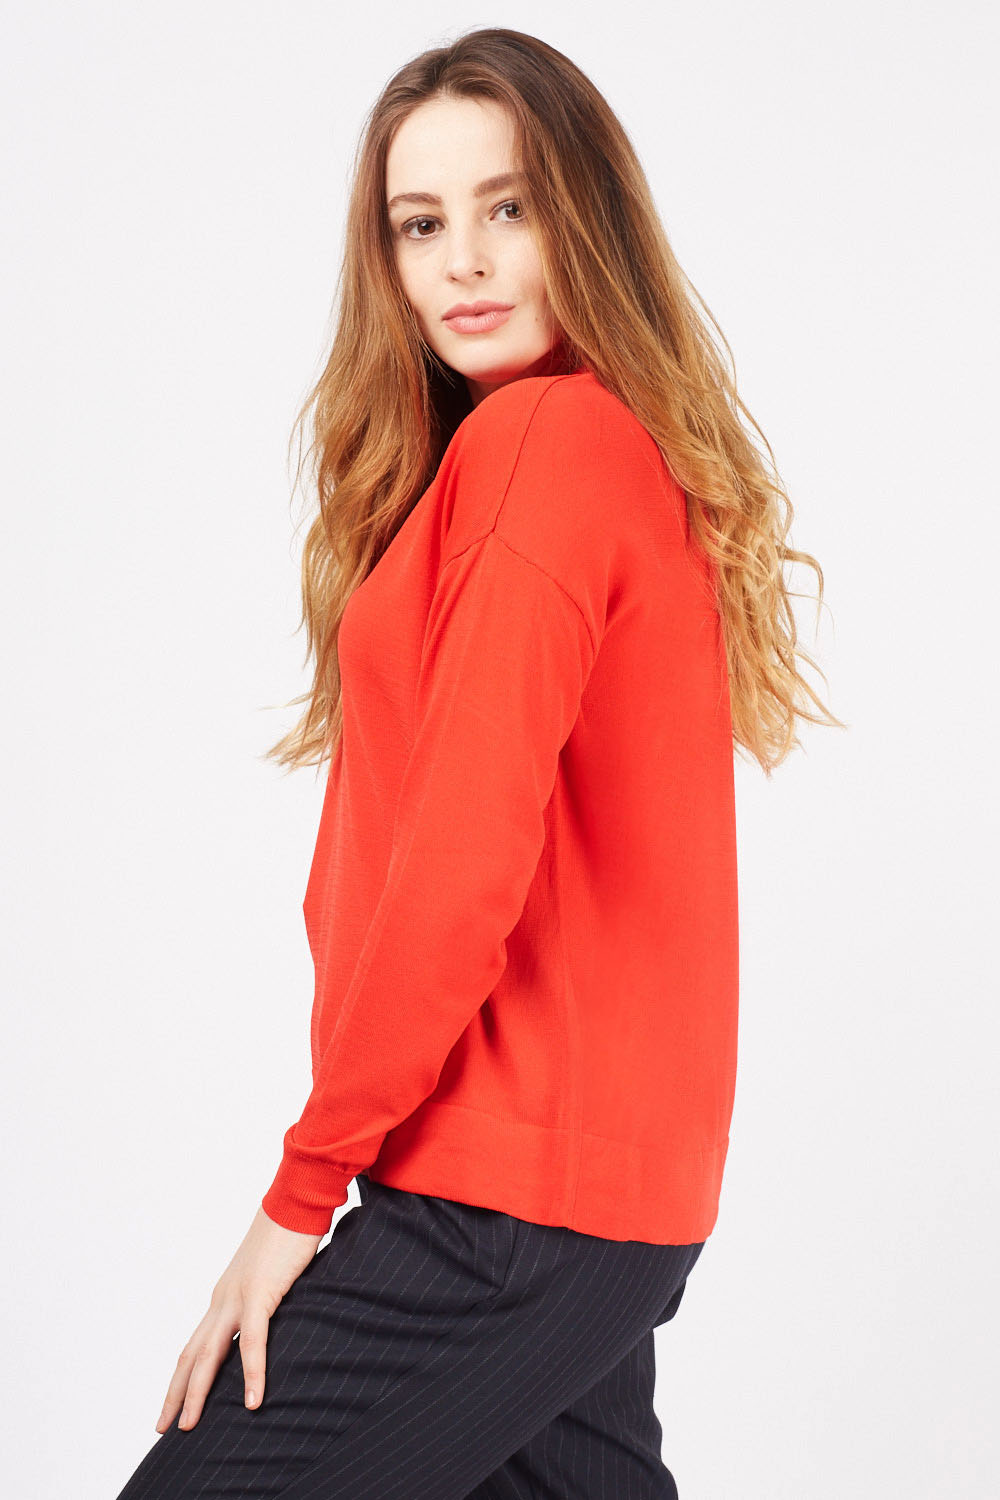 Long Sleeve V-Neck Thin Knit Top - Just $3